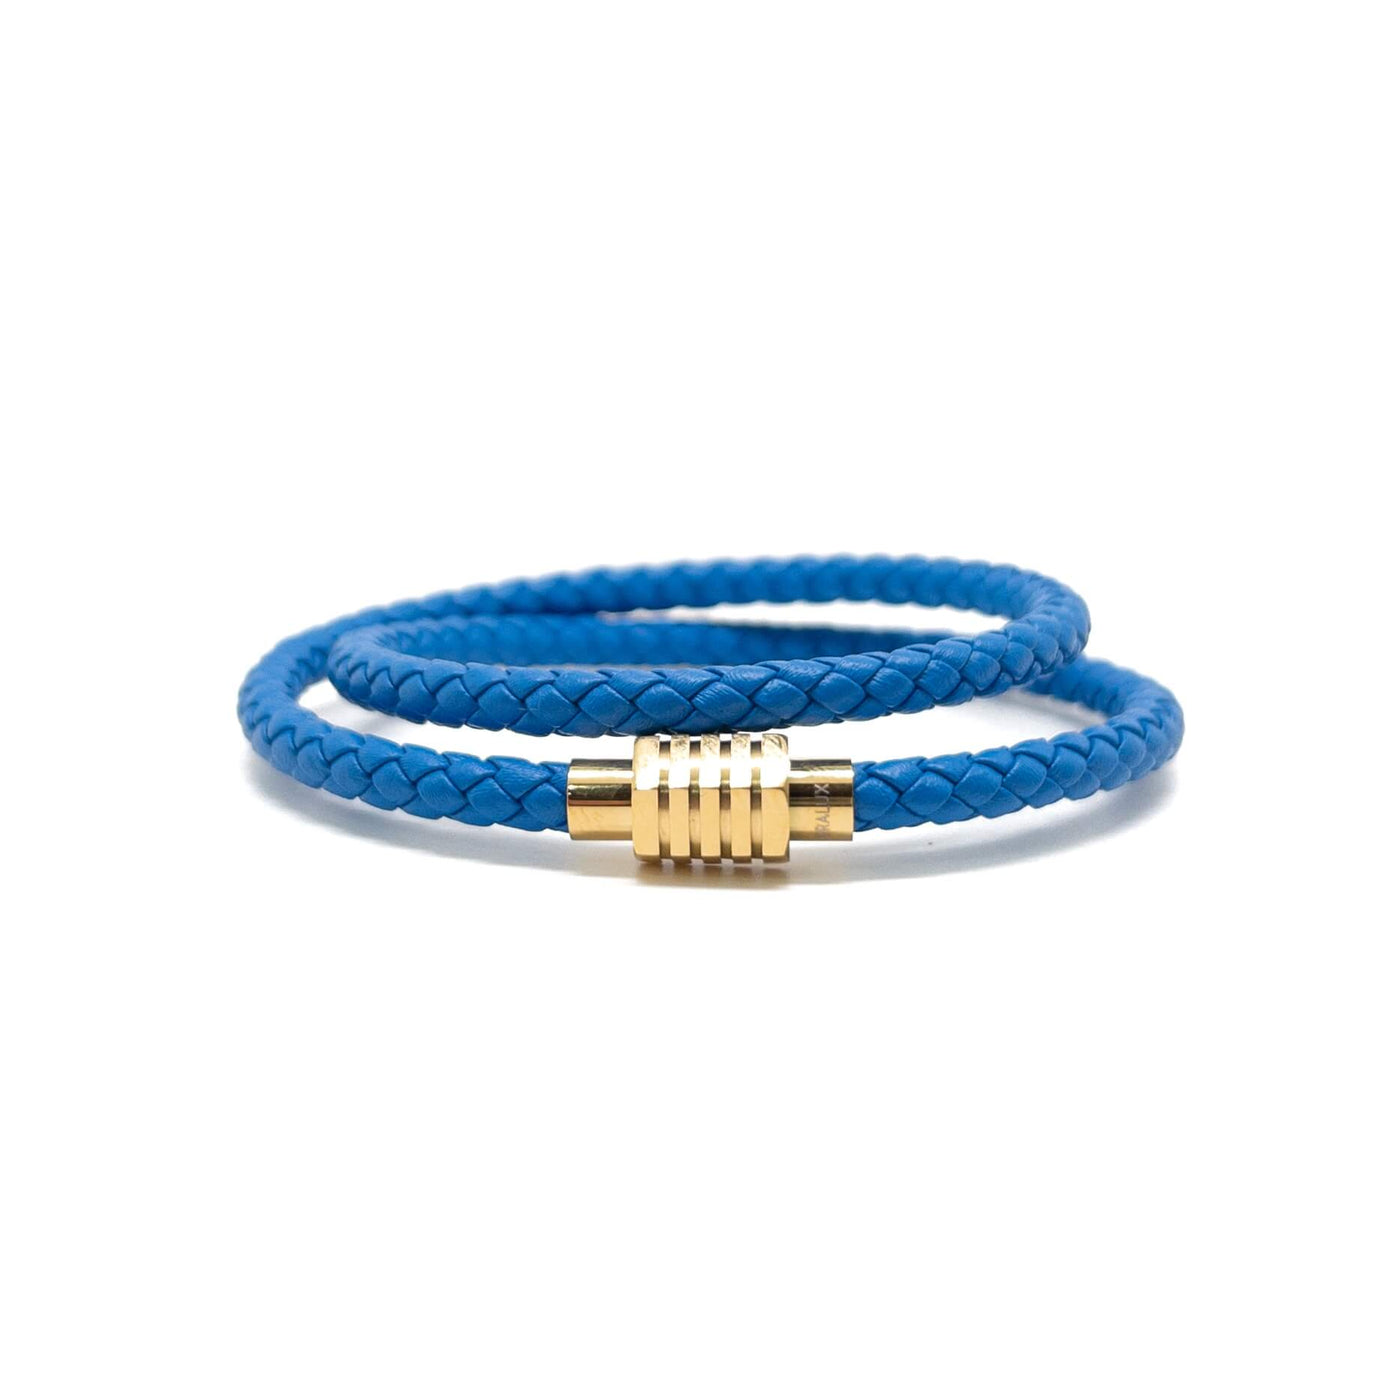 The Blue duo and Gold Plated Buckle Leather bracelet